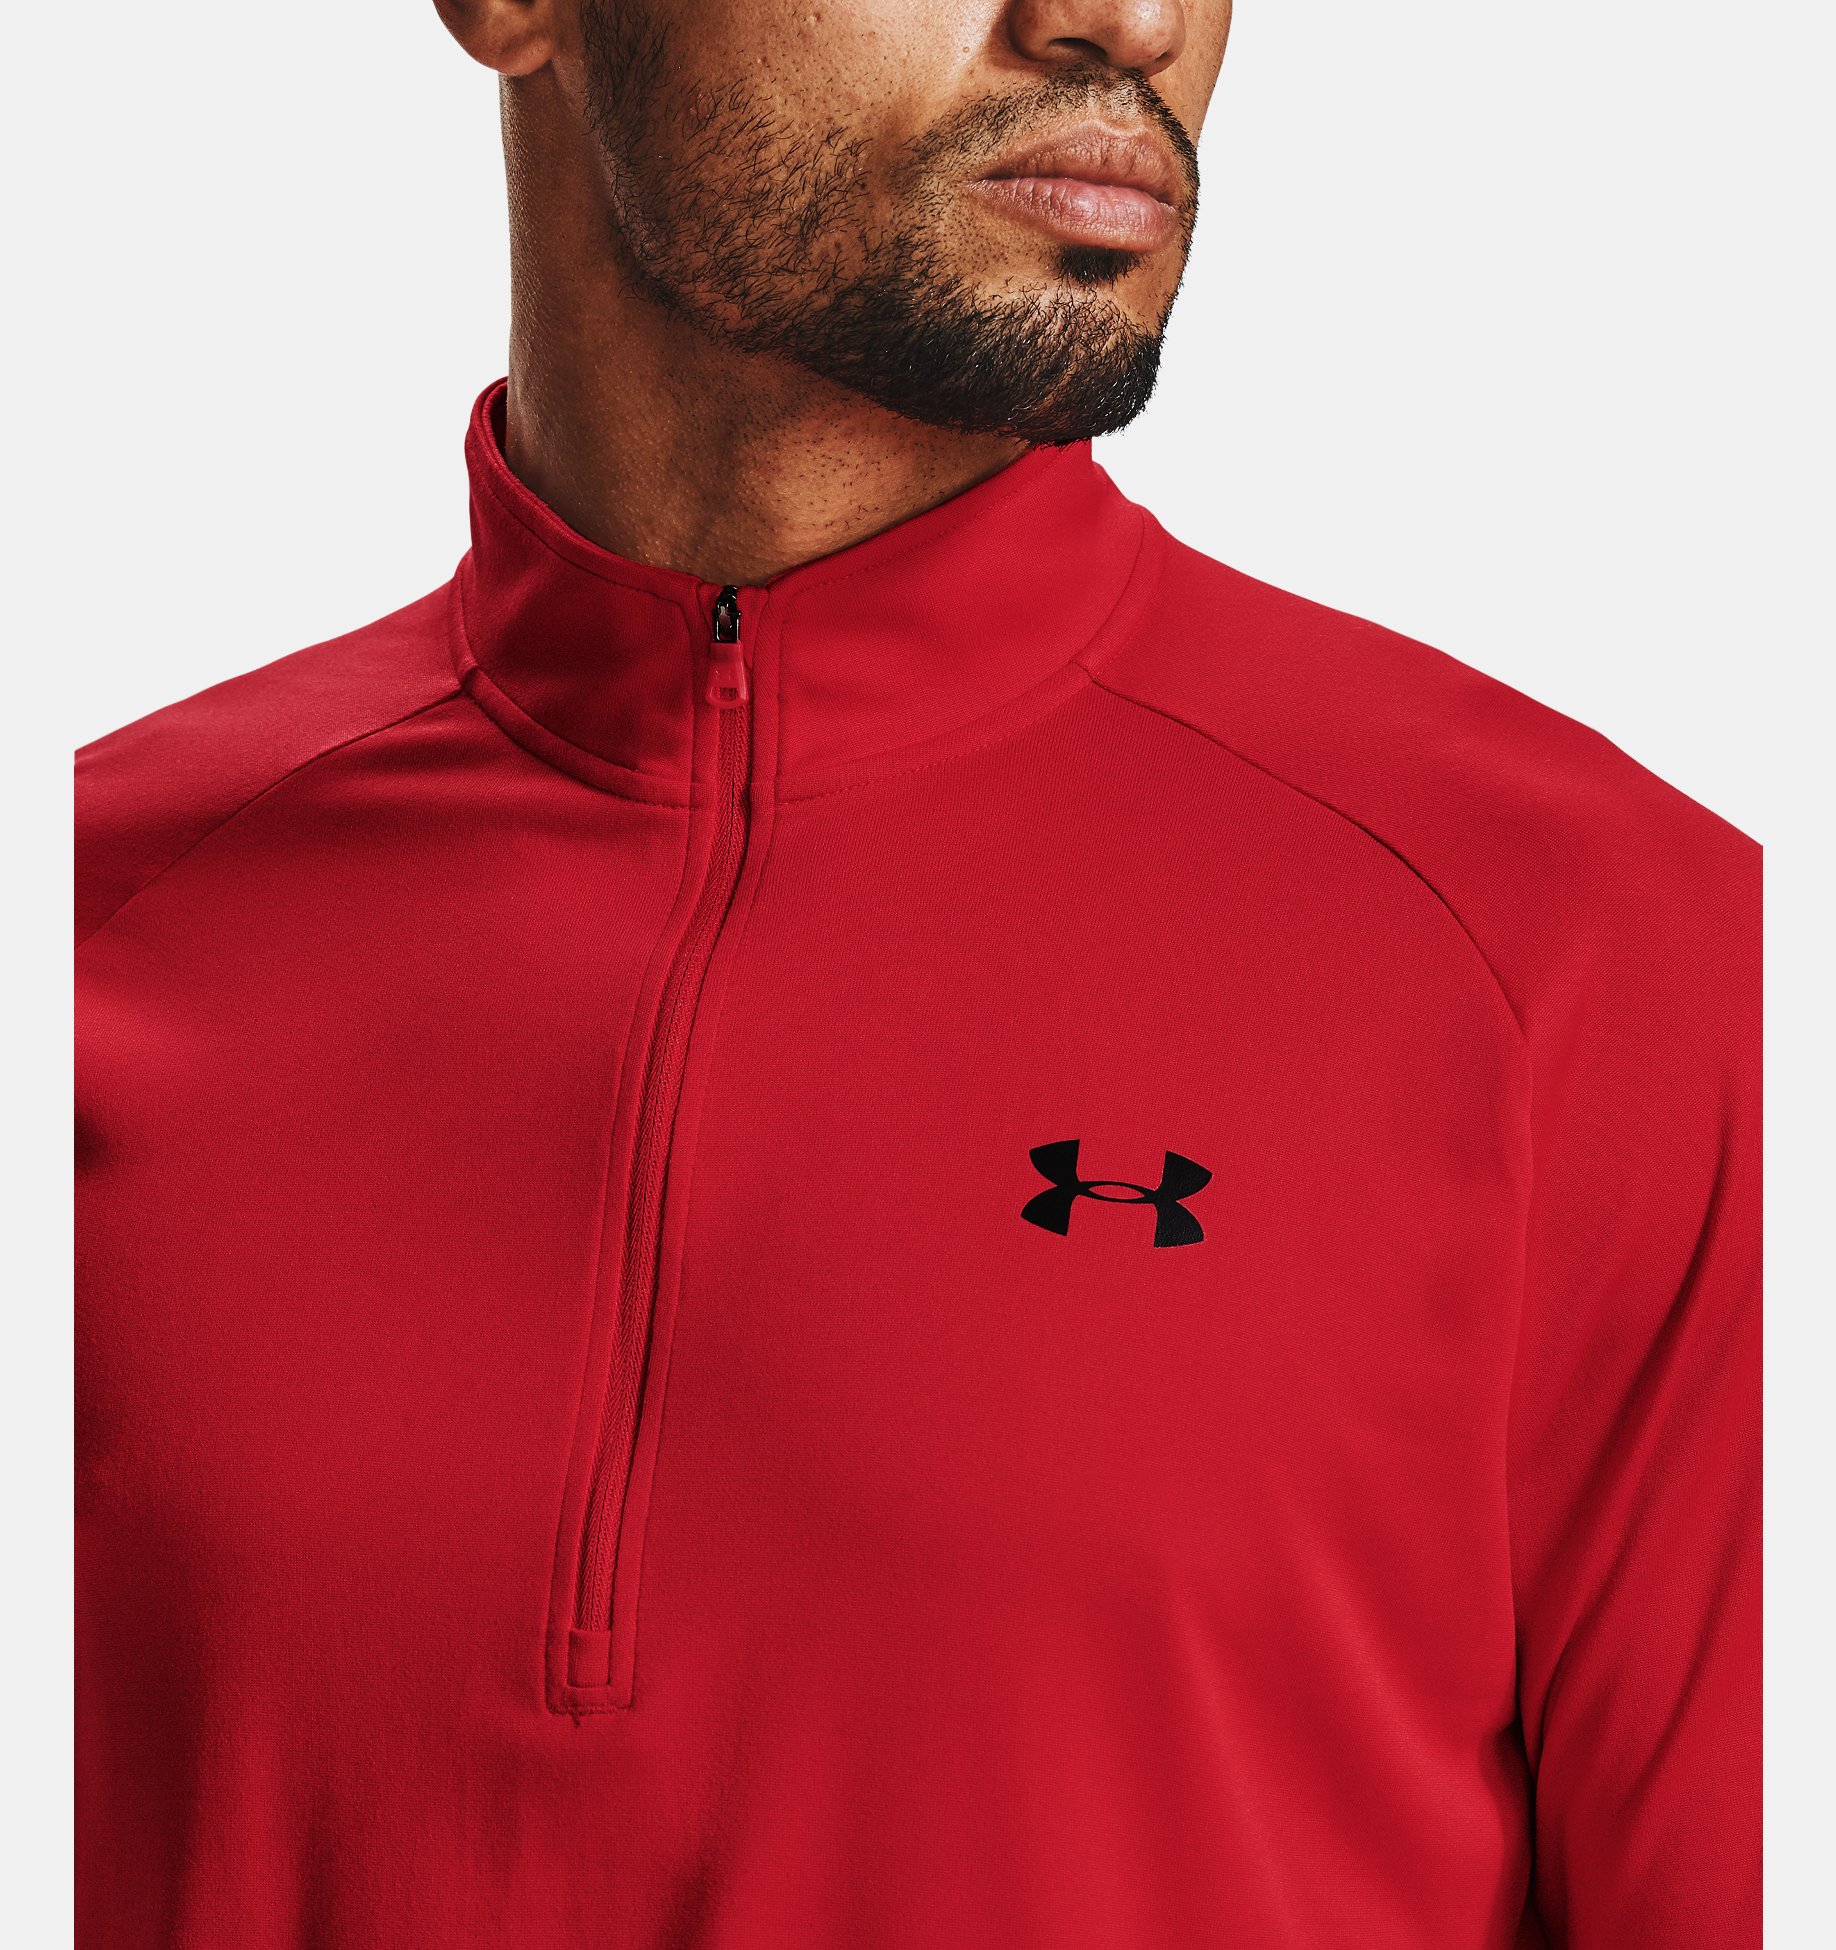 Under Armour Mens Seamless Half Zip Top Black Sports Running Breathable 